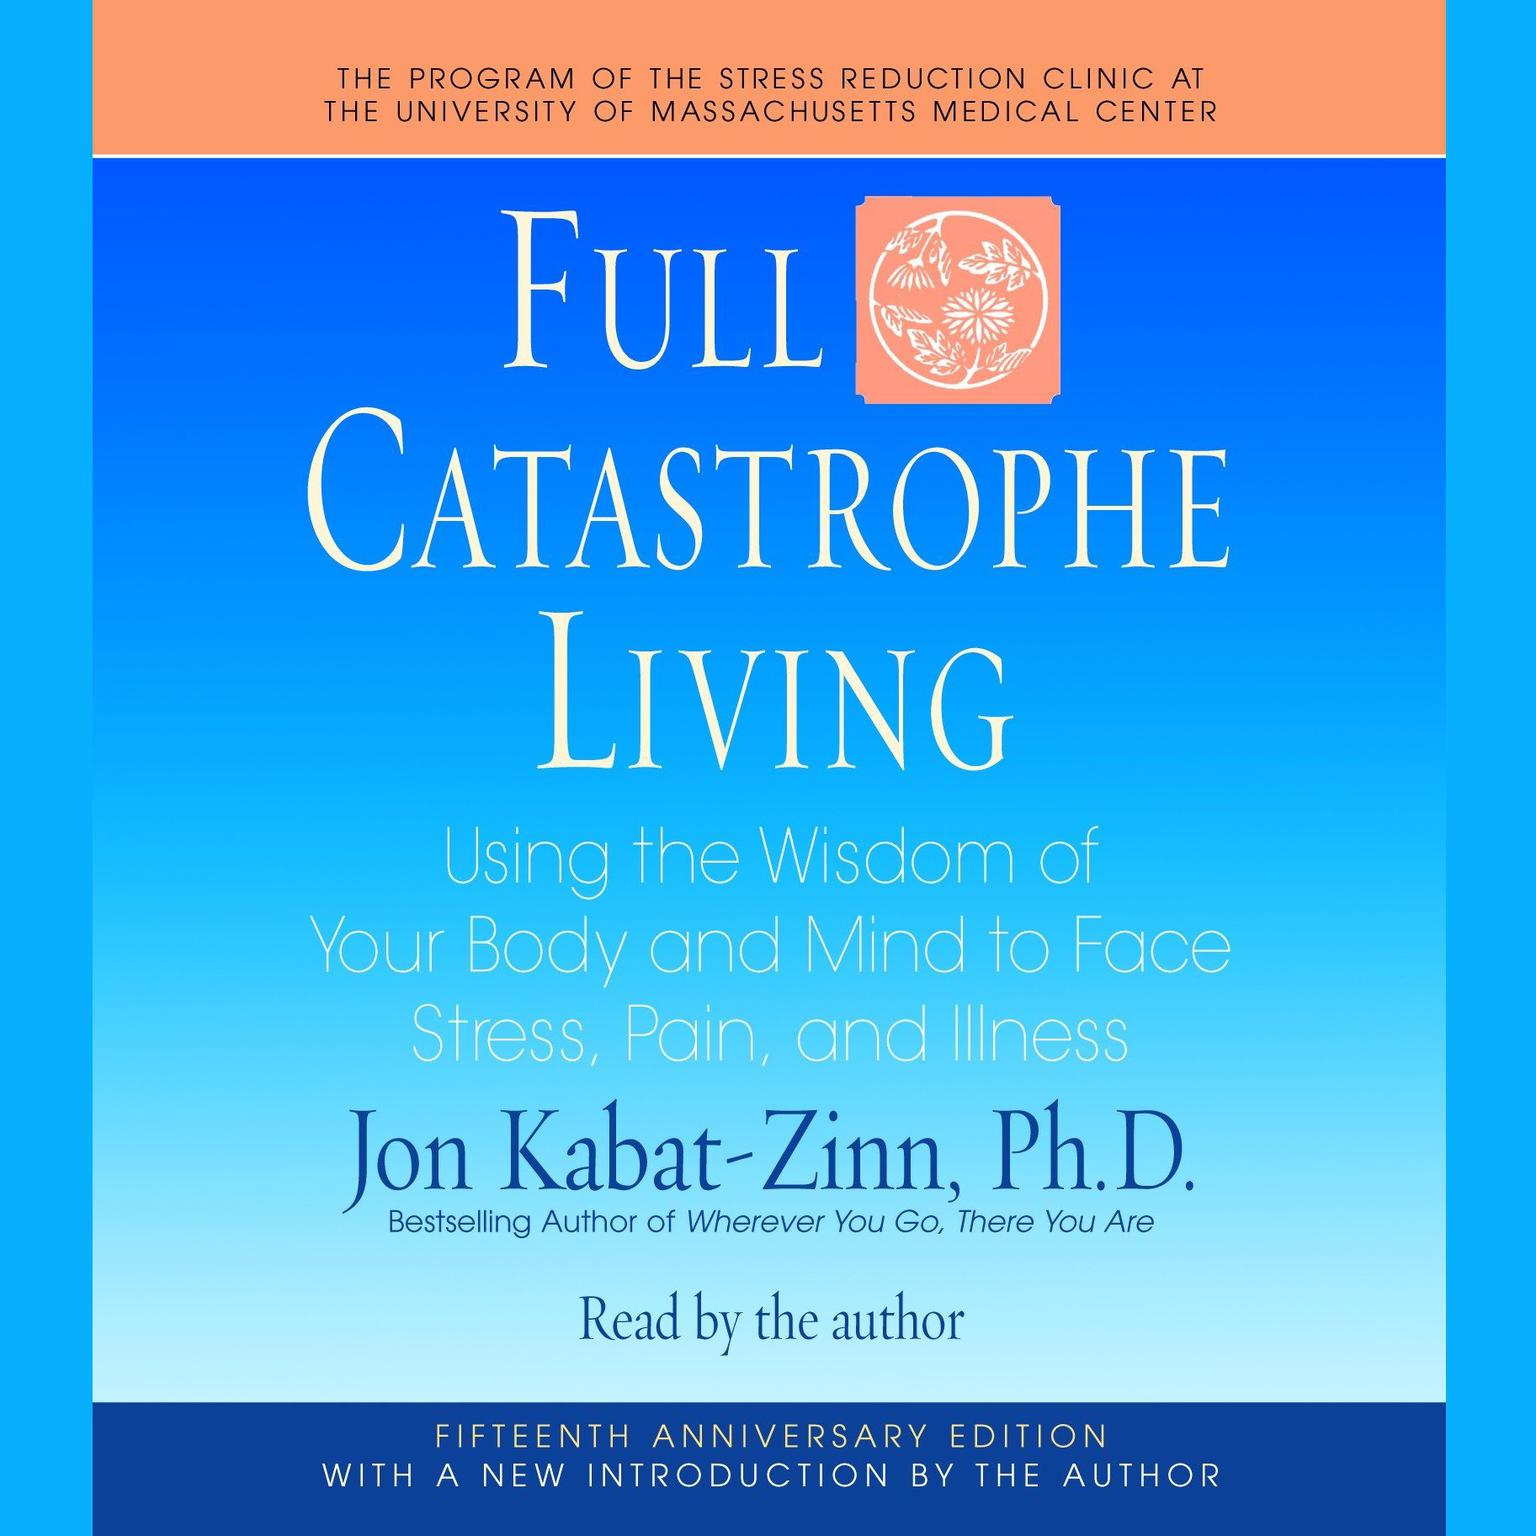 Full Catastrophe Living (Abridged): Using the Wisdom of Your Body and Mind to Face Stress, Pain, and Illness Audiobook, by Jon Kabat-Zinn